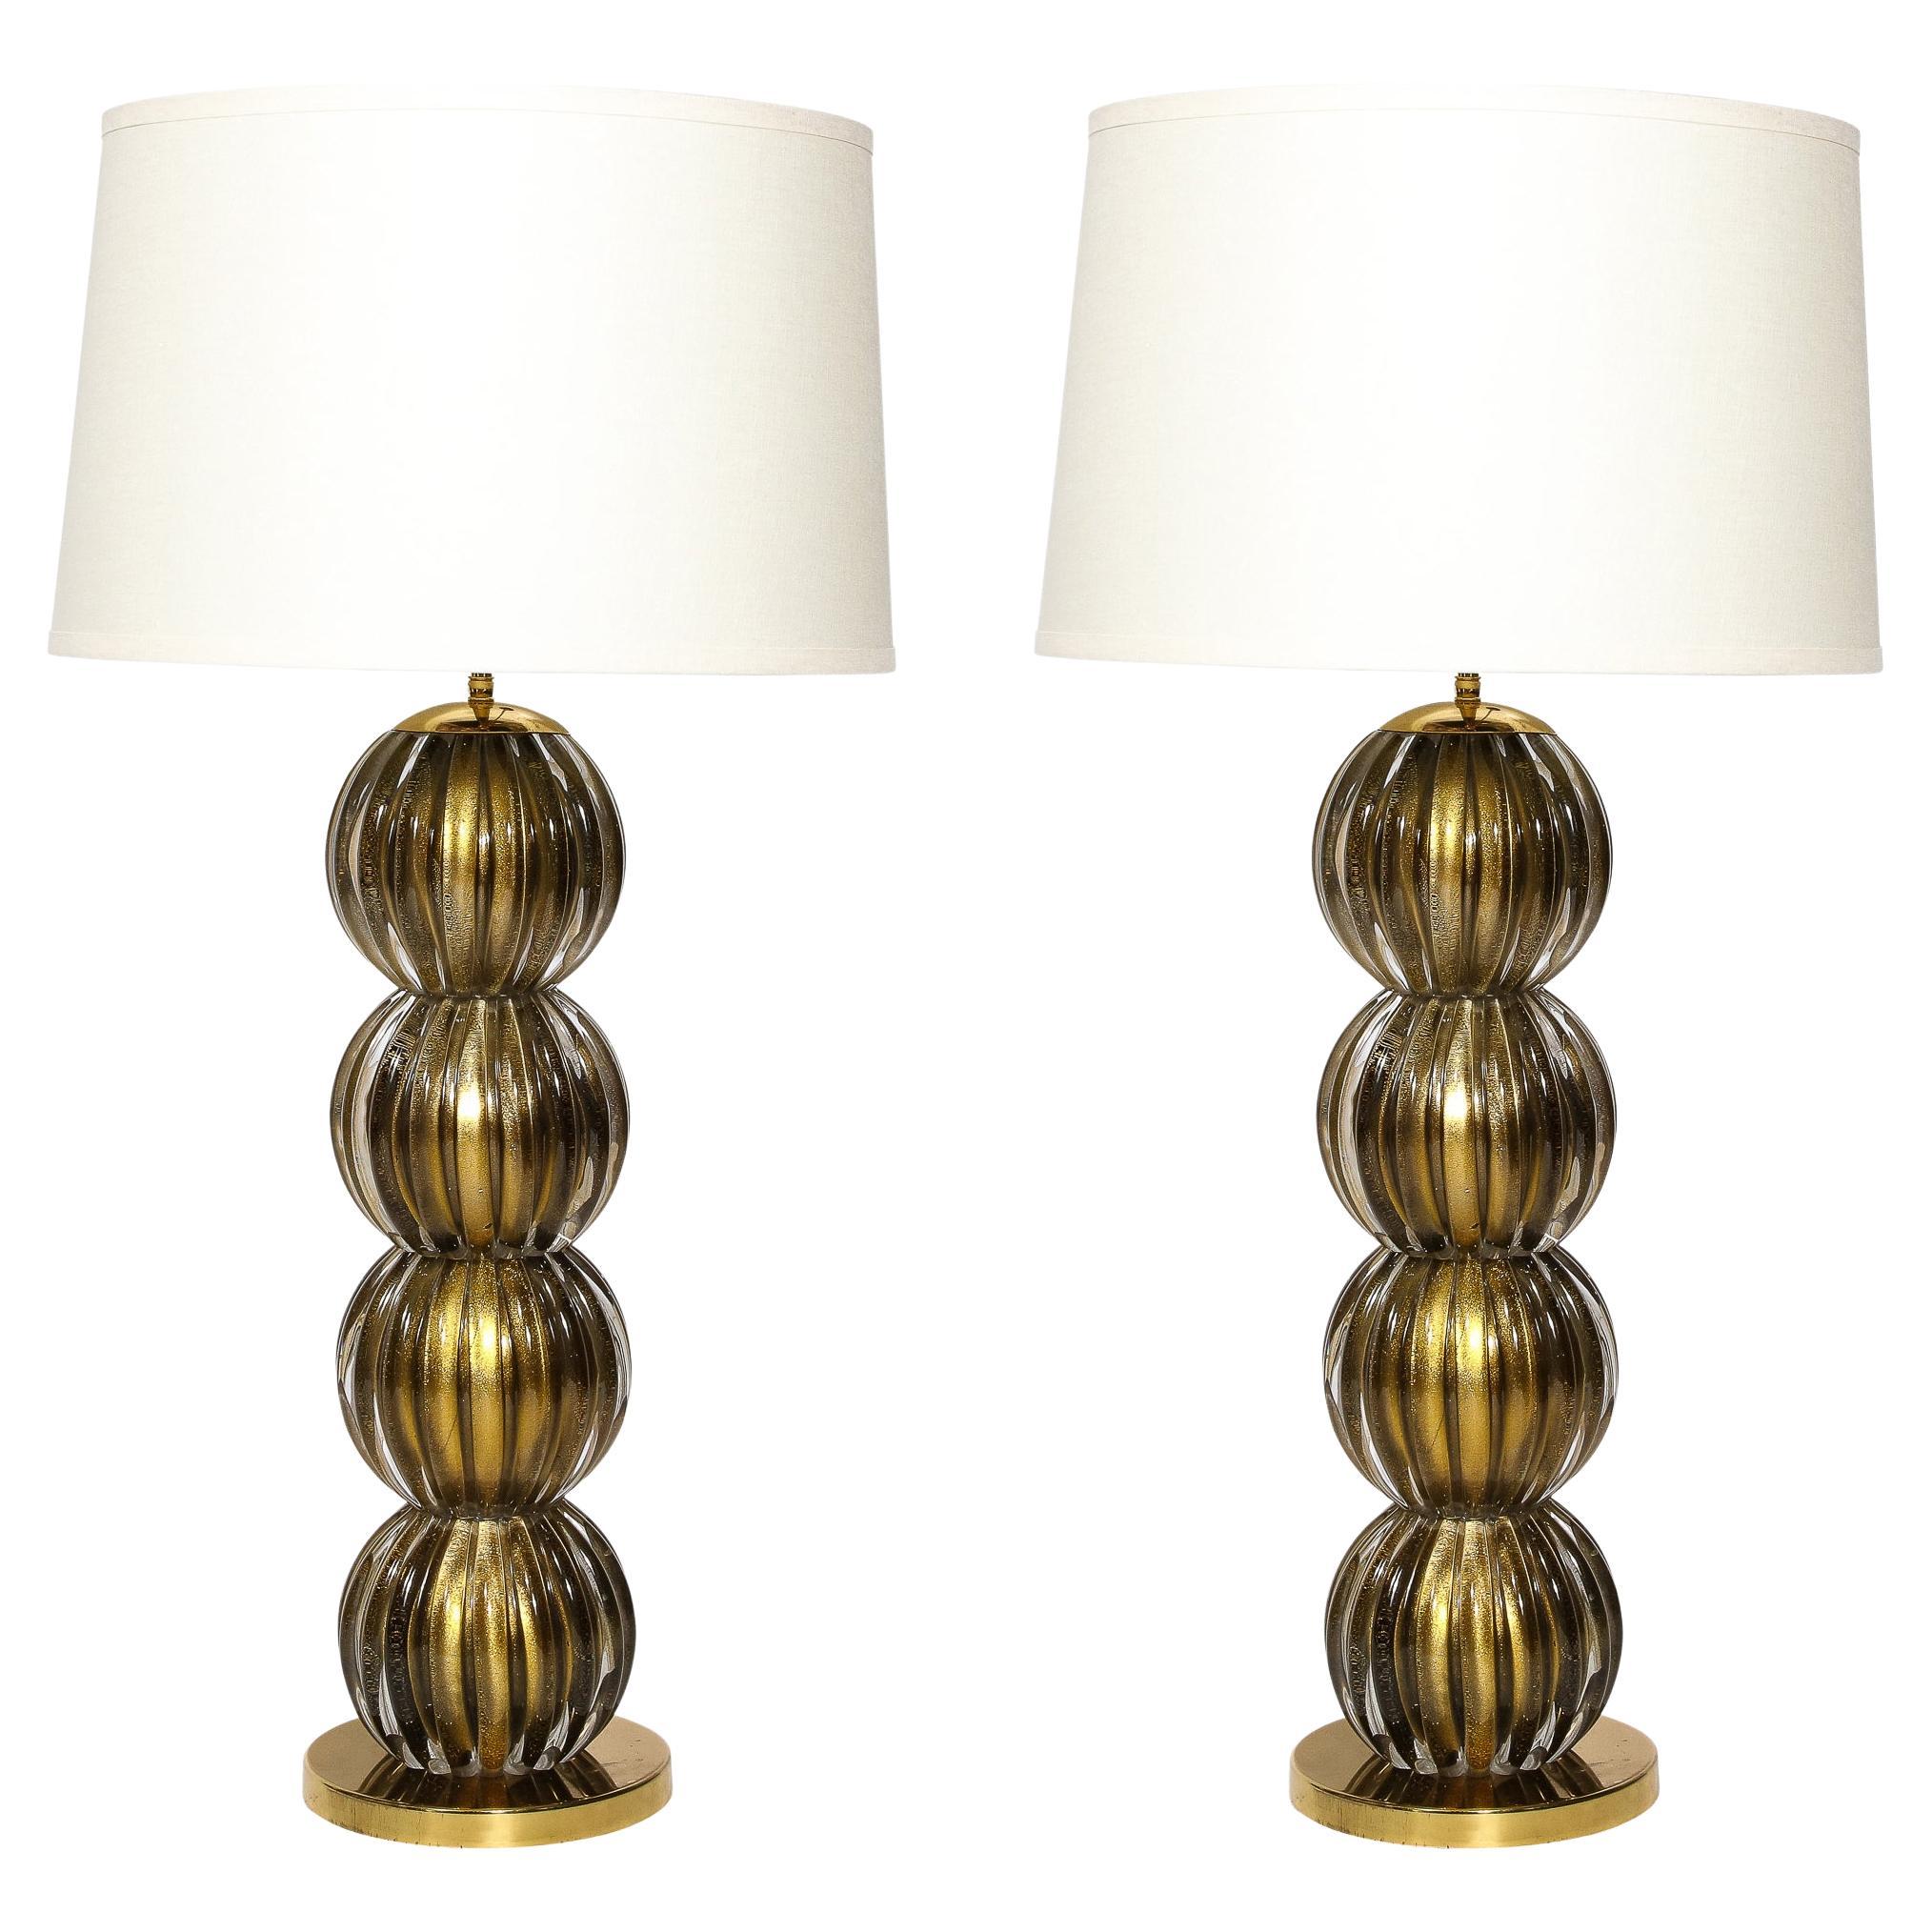 Large Scale Modern Hand-Blown Murano Glass Table Lamps in Smoked Gold For Sale